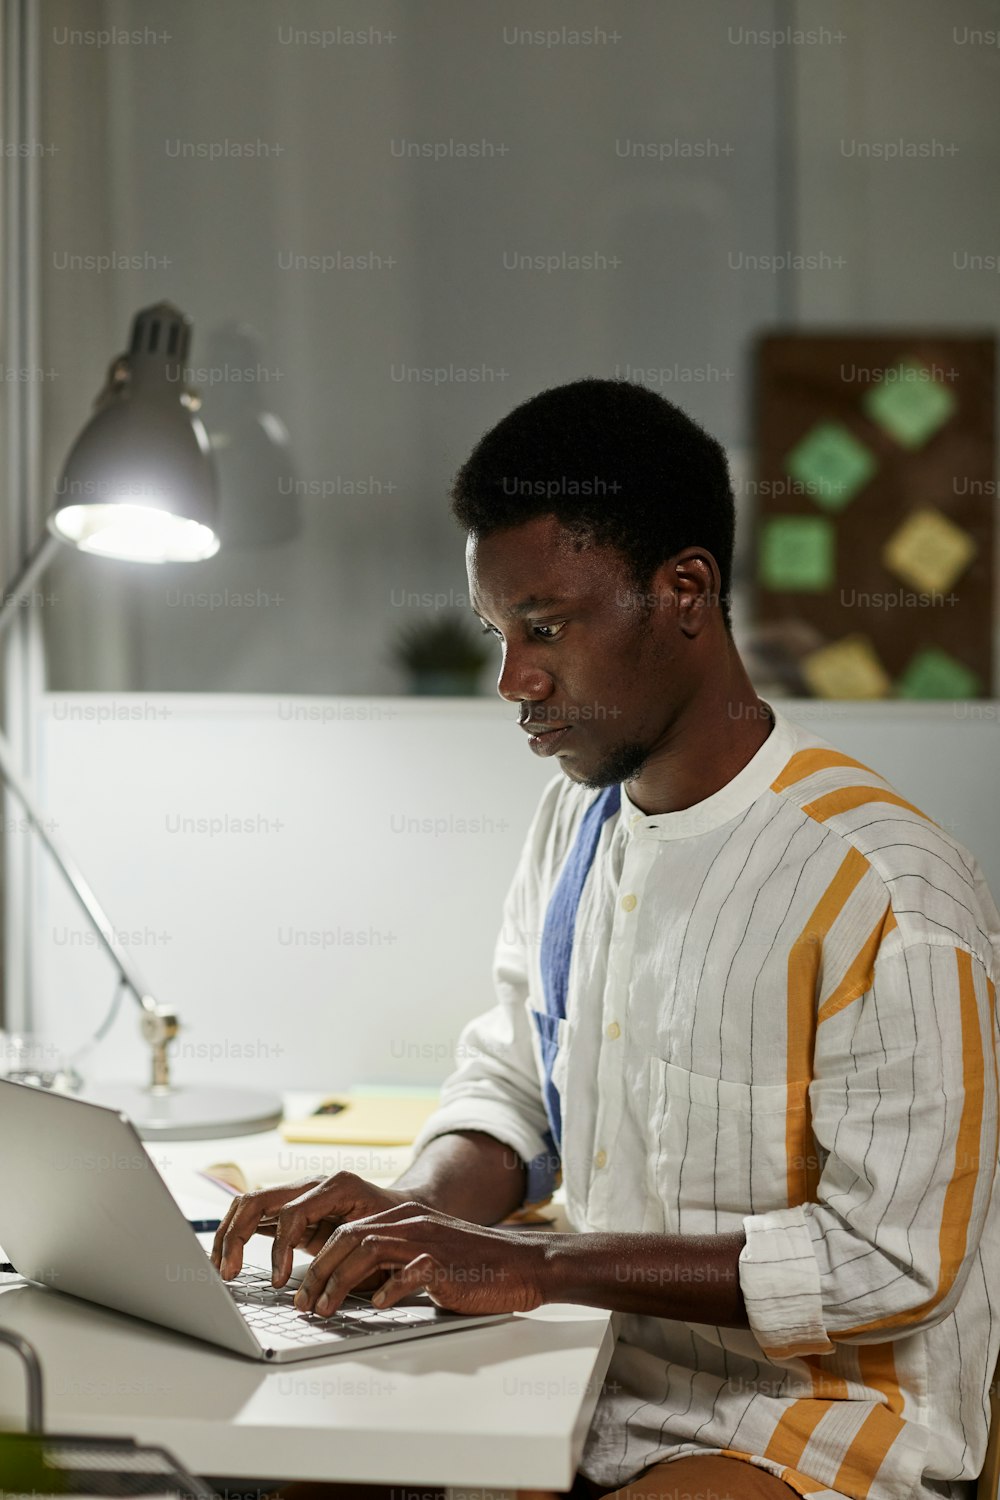 Vertical side view portrait of young African American man studying or working late at night